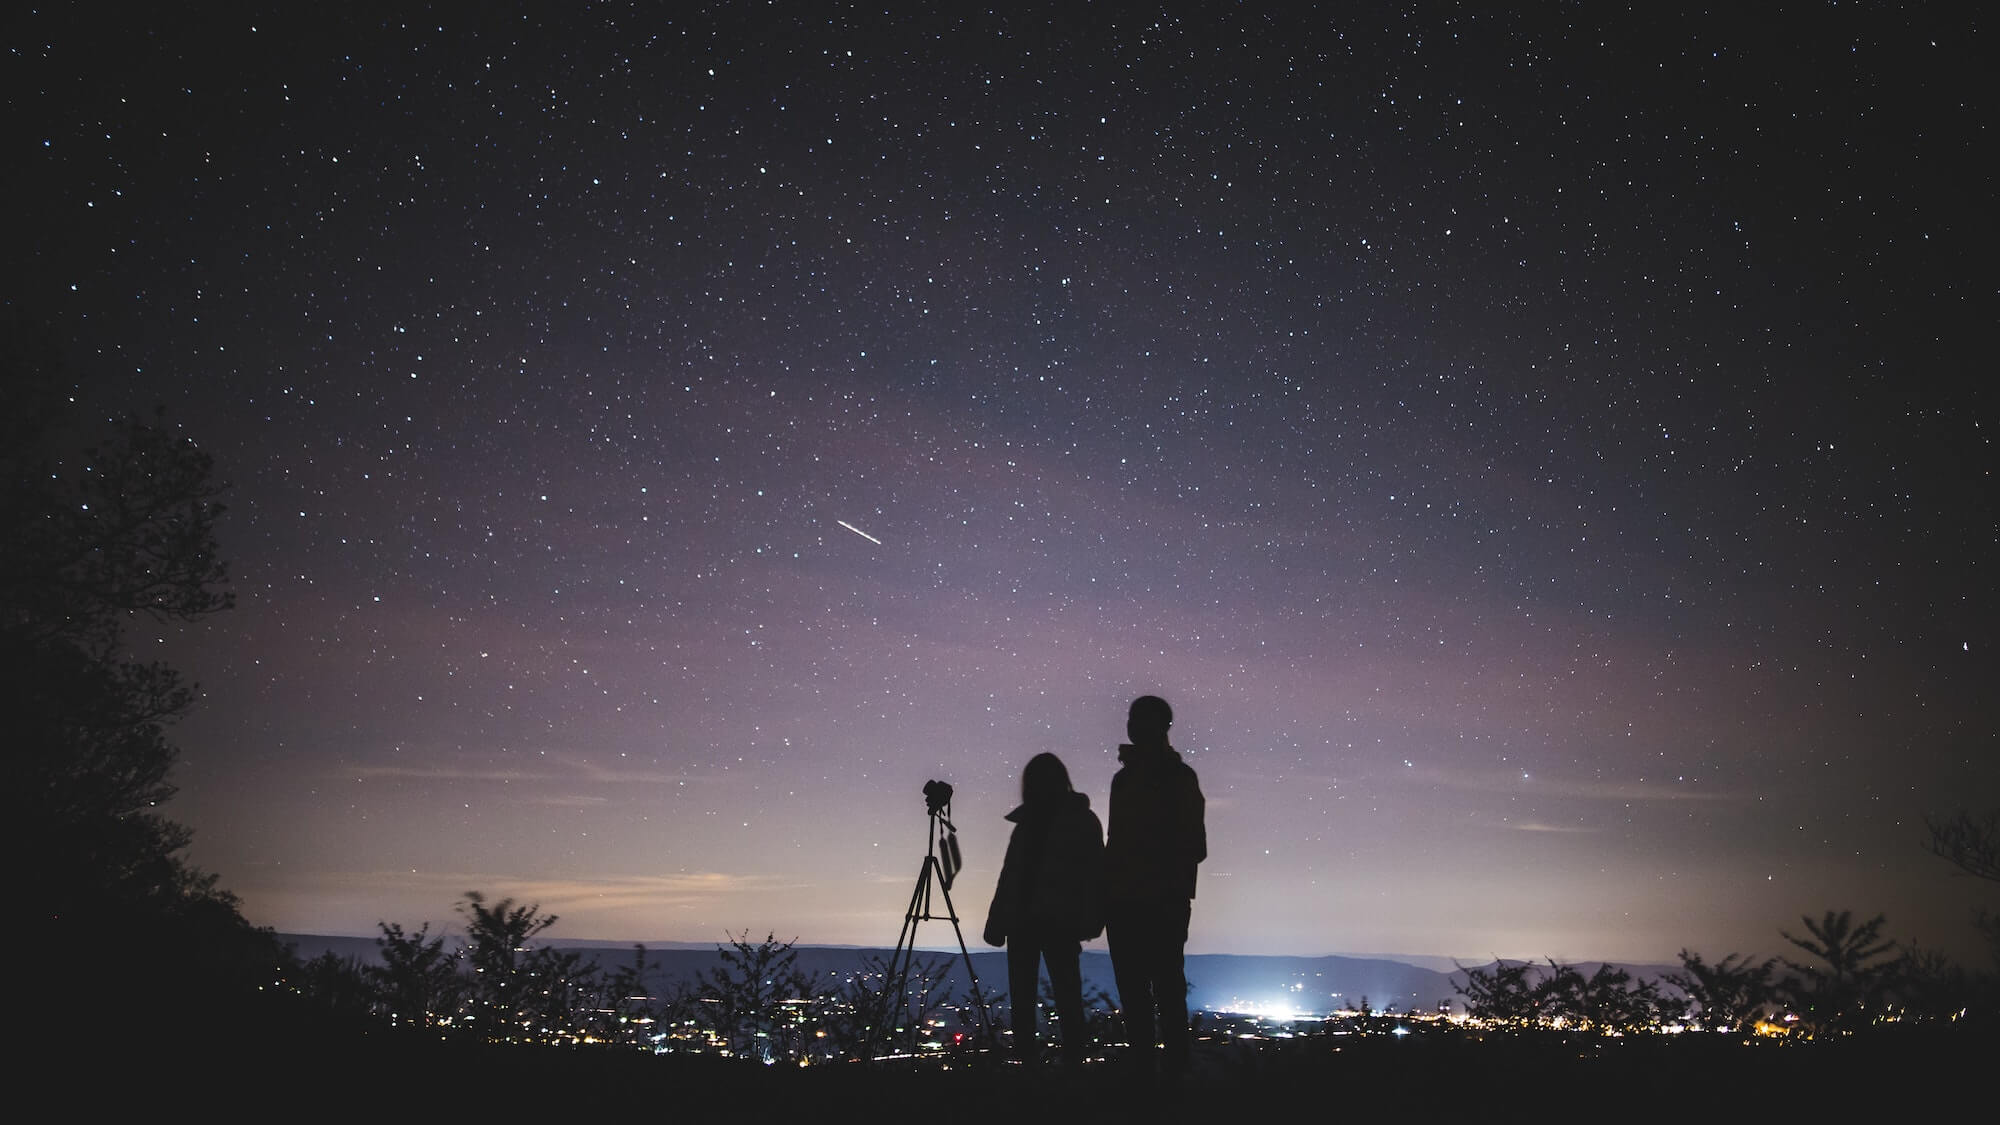 Silhouette of man and woman standing on a hill against a starlit sky.